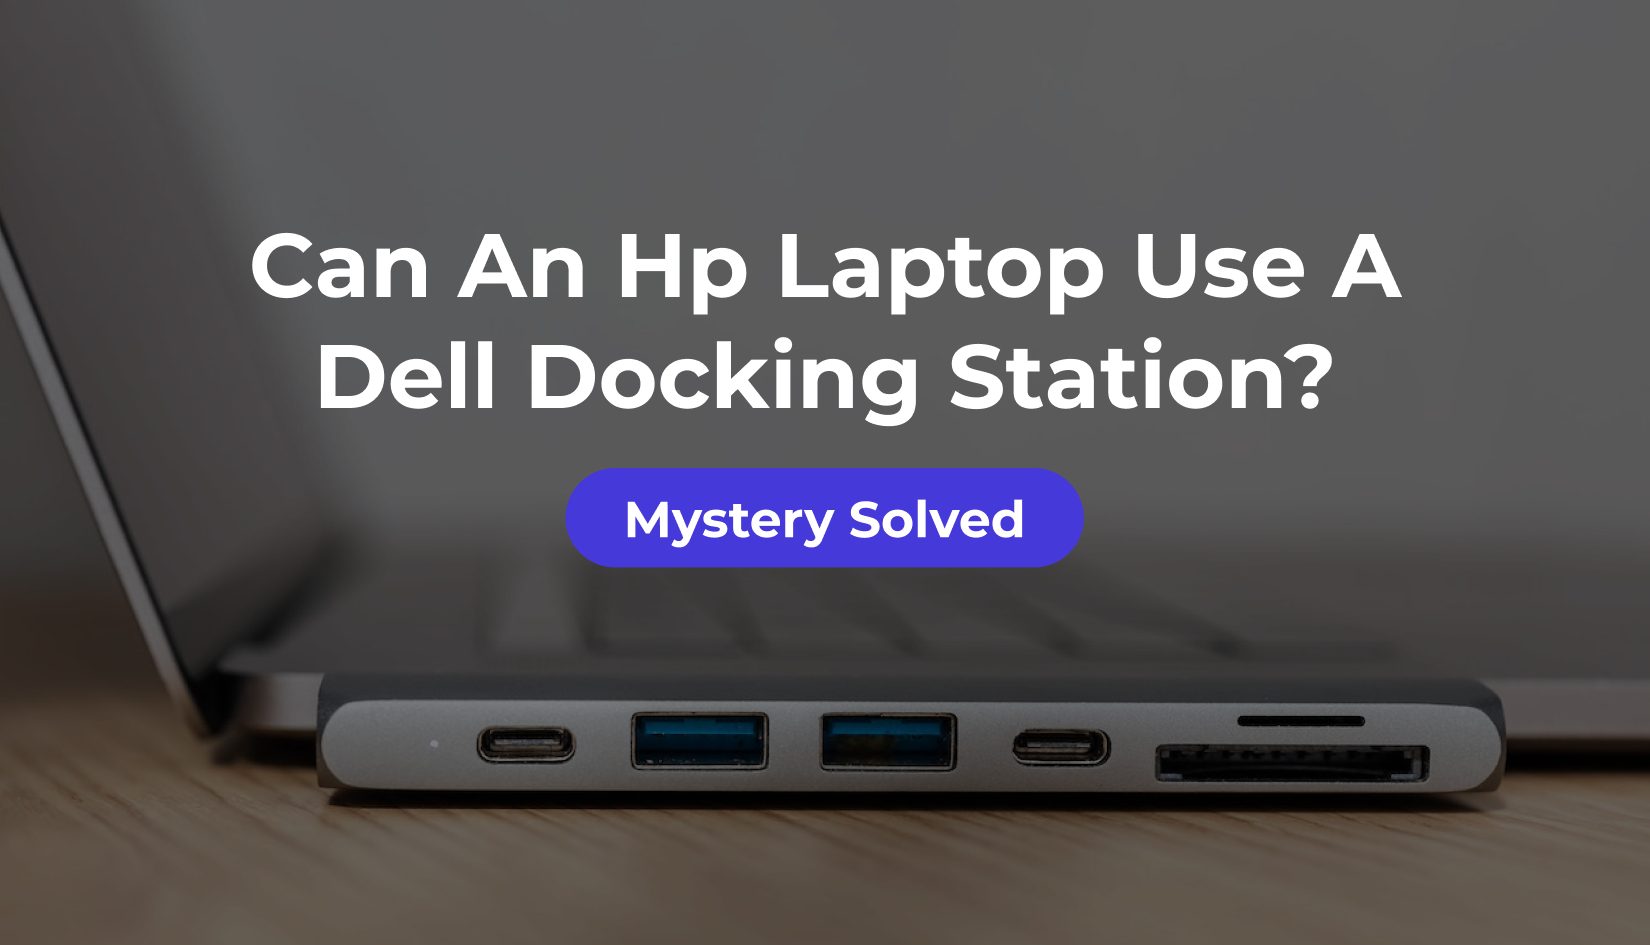 Can An Hp Laptop Use A Dell Docking Station?